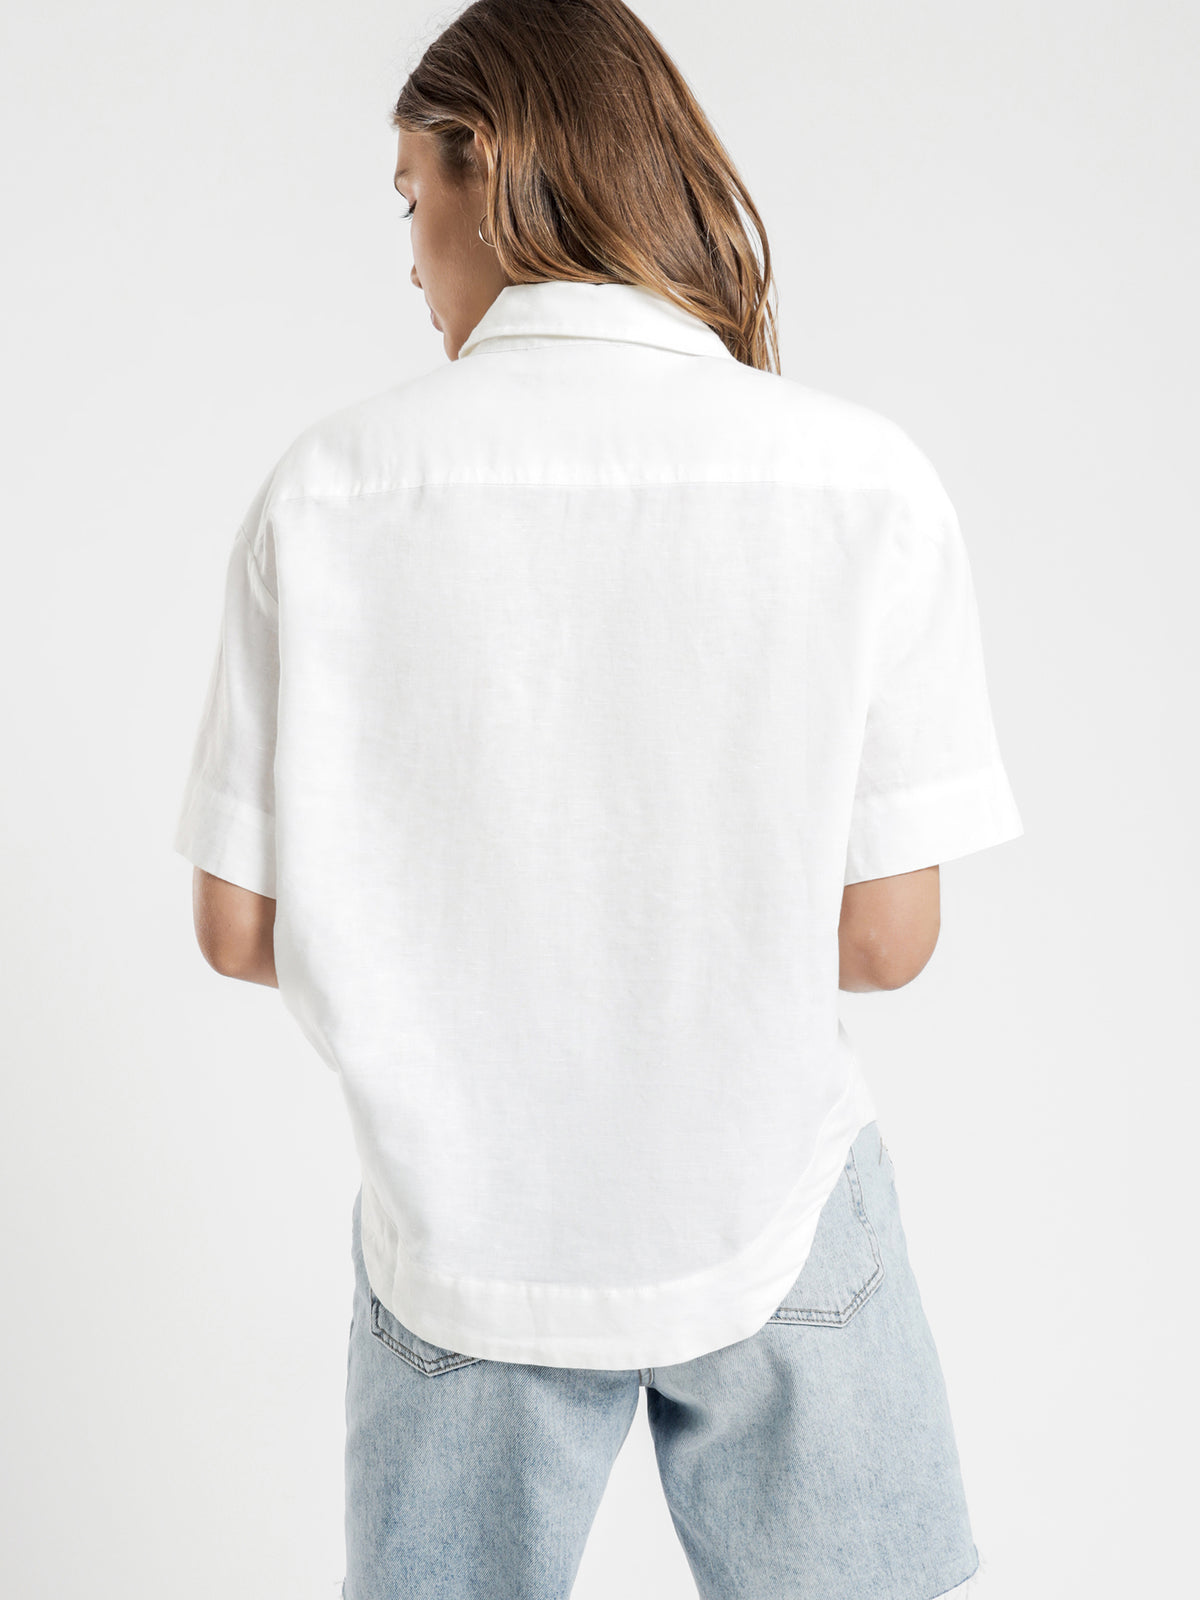 Clement Linen Button Up Shirt in White